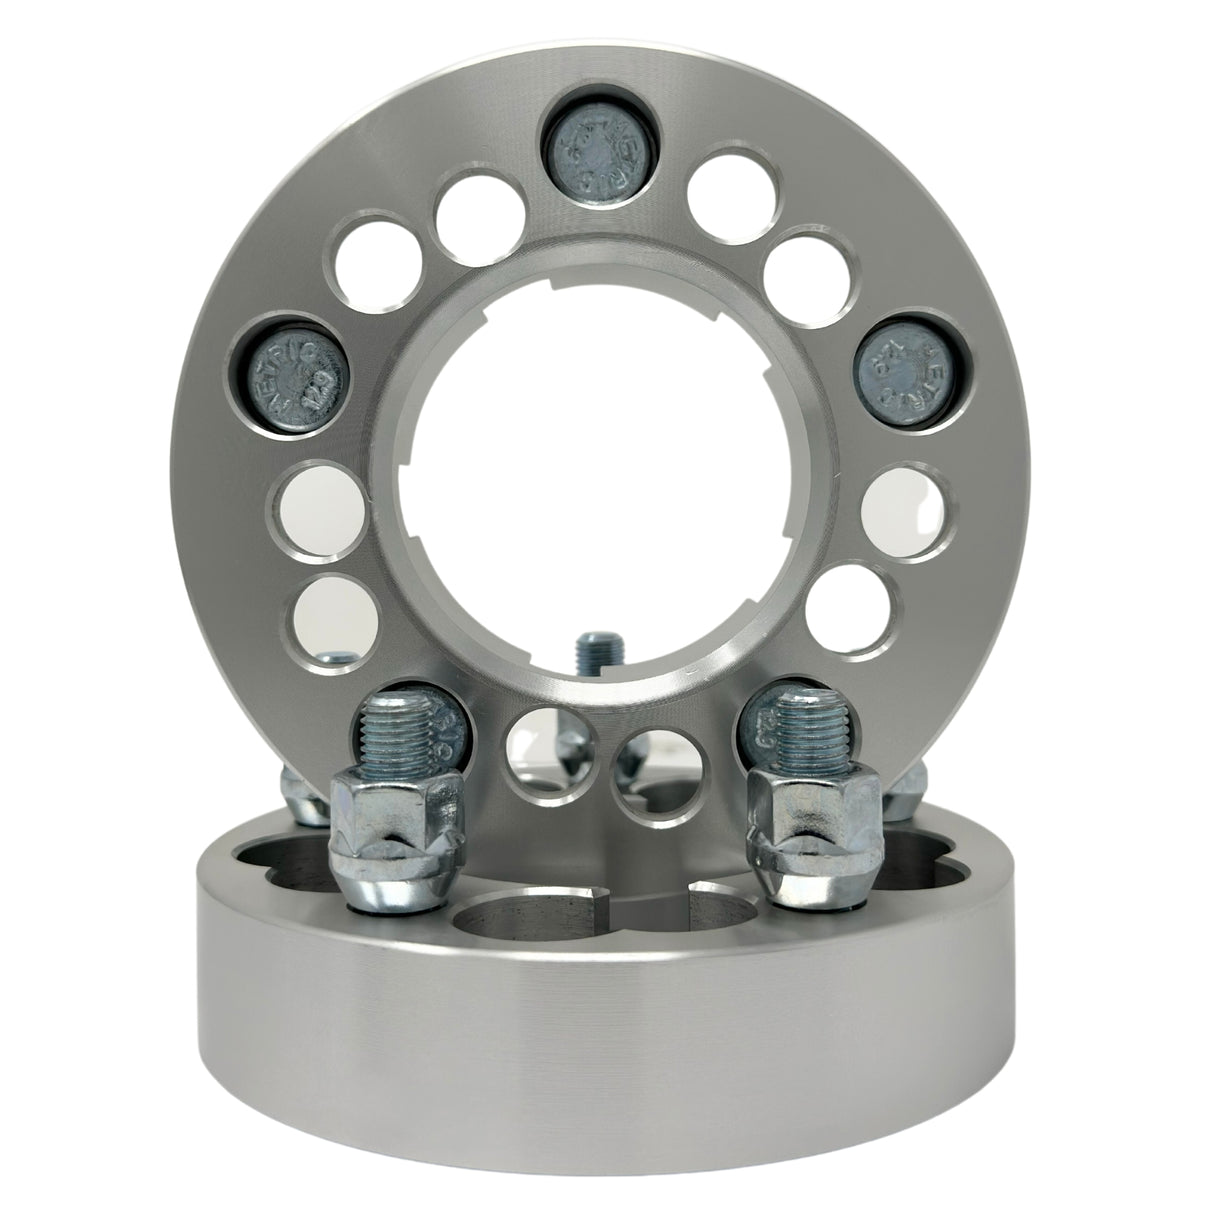 5x114.3 or 5x120.7 to 5x112 Wheel Adapters Universal Kit 1.25" Inch (32mm) 12x1.5 Studs & Lug Nuts 74mm Center Bore | 5x4.5 or 5x4.75 to 5x112